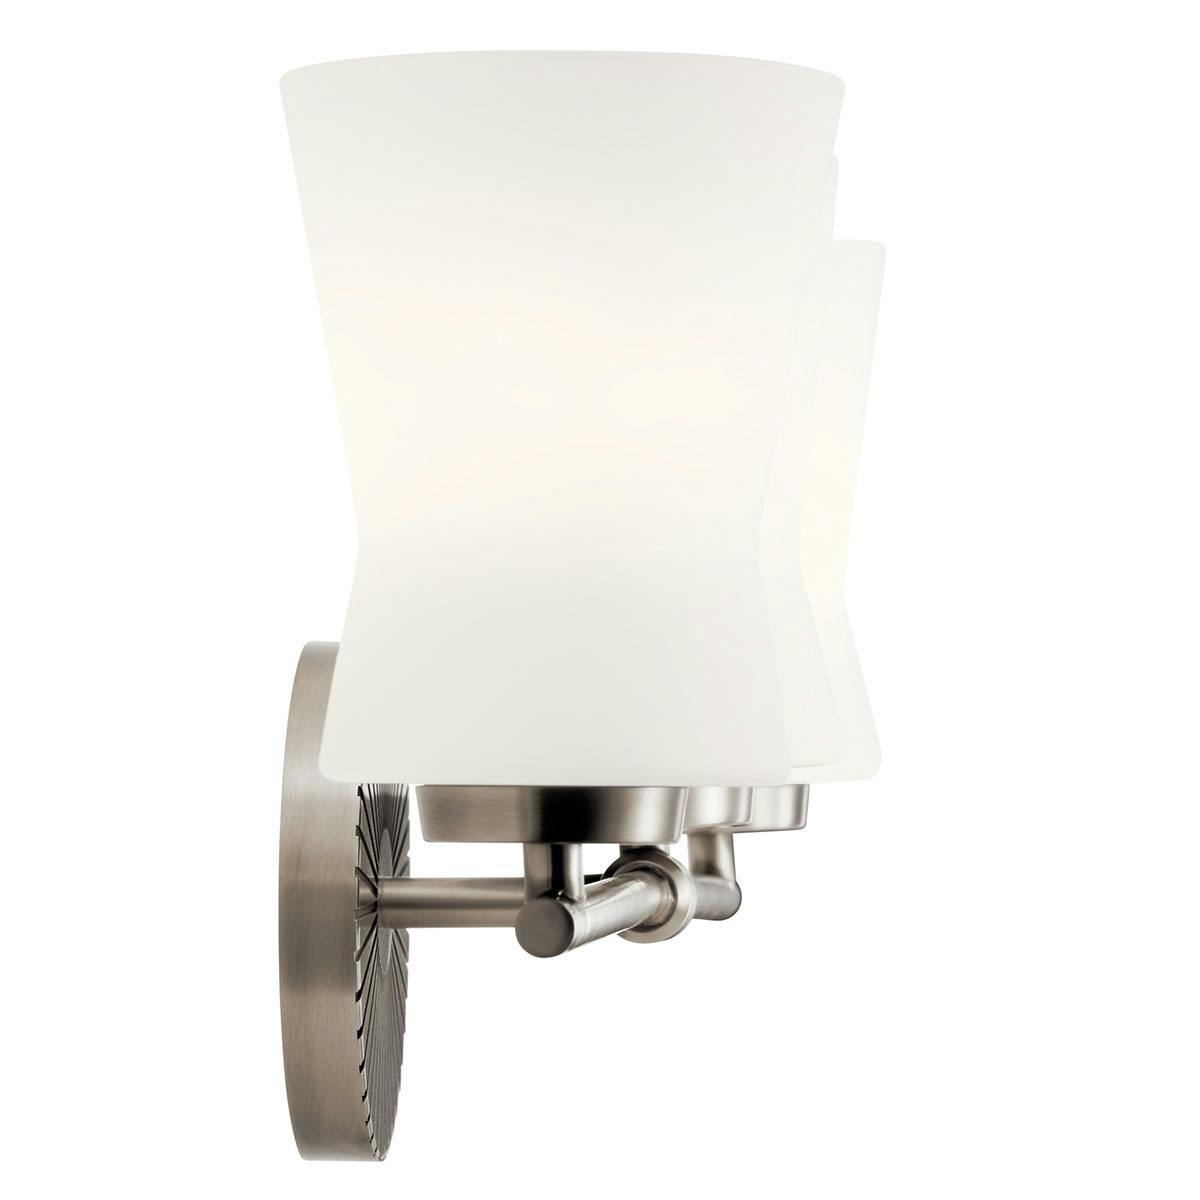 Profile view of the Brianne 3 Light Vanity Light Pewter on a white background